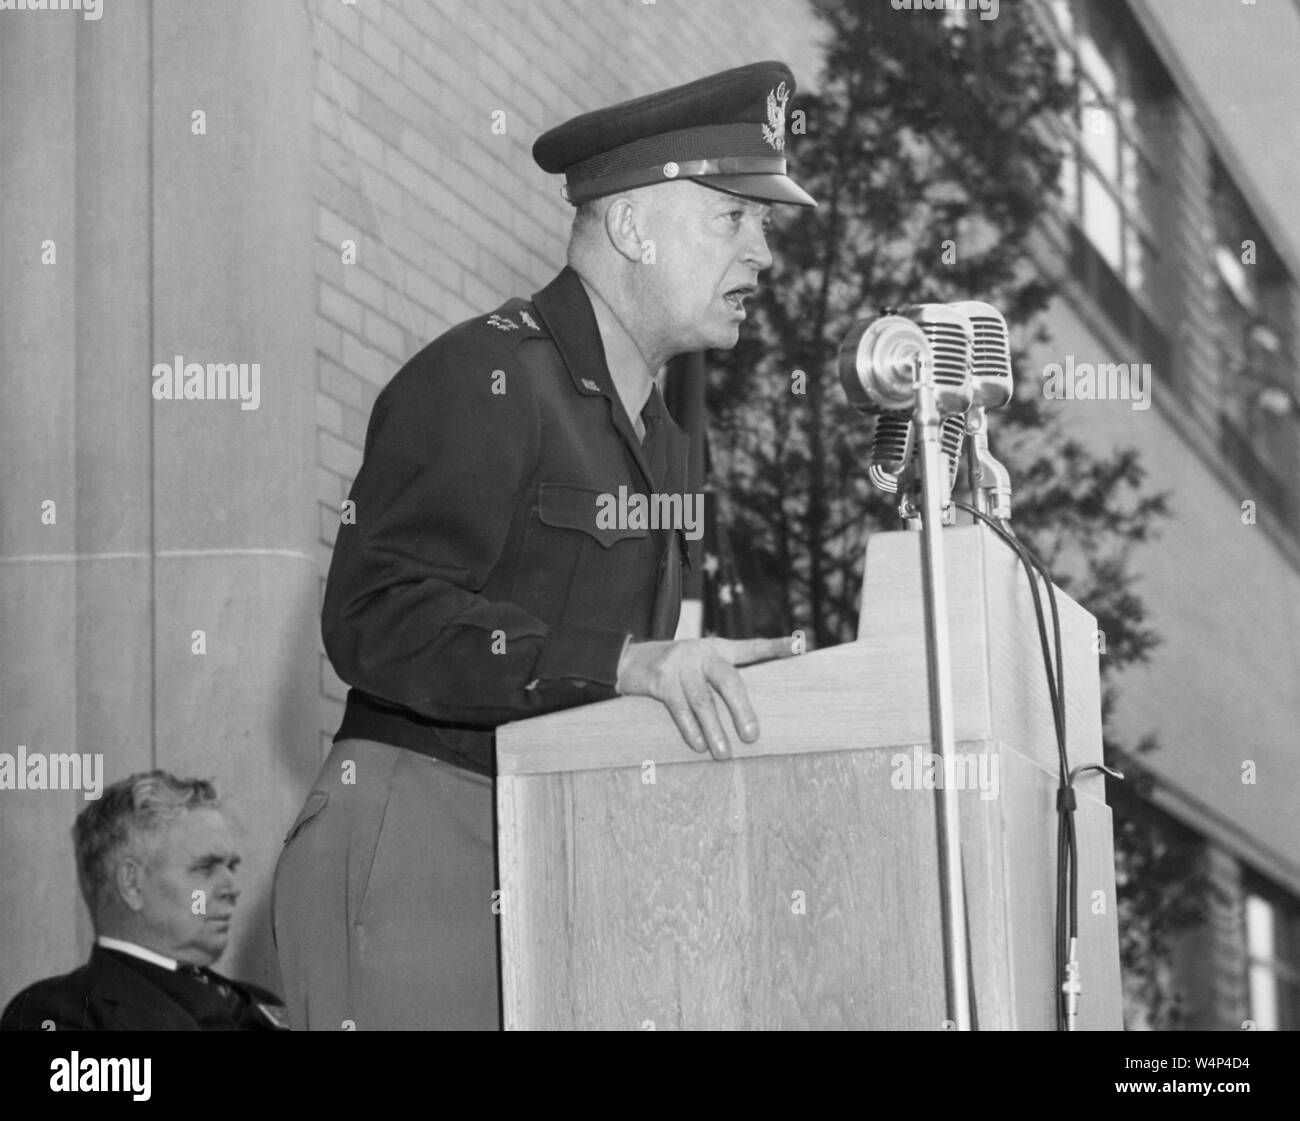 General Dwight D Eisenhower delivers a speech at the Aircraft Engine Research Laboratory, Cleveland, Ohio, Center Director Edward Ray Sharp sitting in the background, April 11, 1946. Image courtesy National Aeronautics and Space Administration (NASA). () Stock Photo